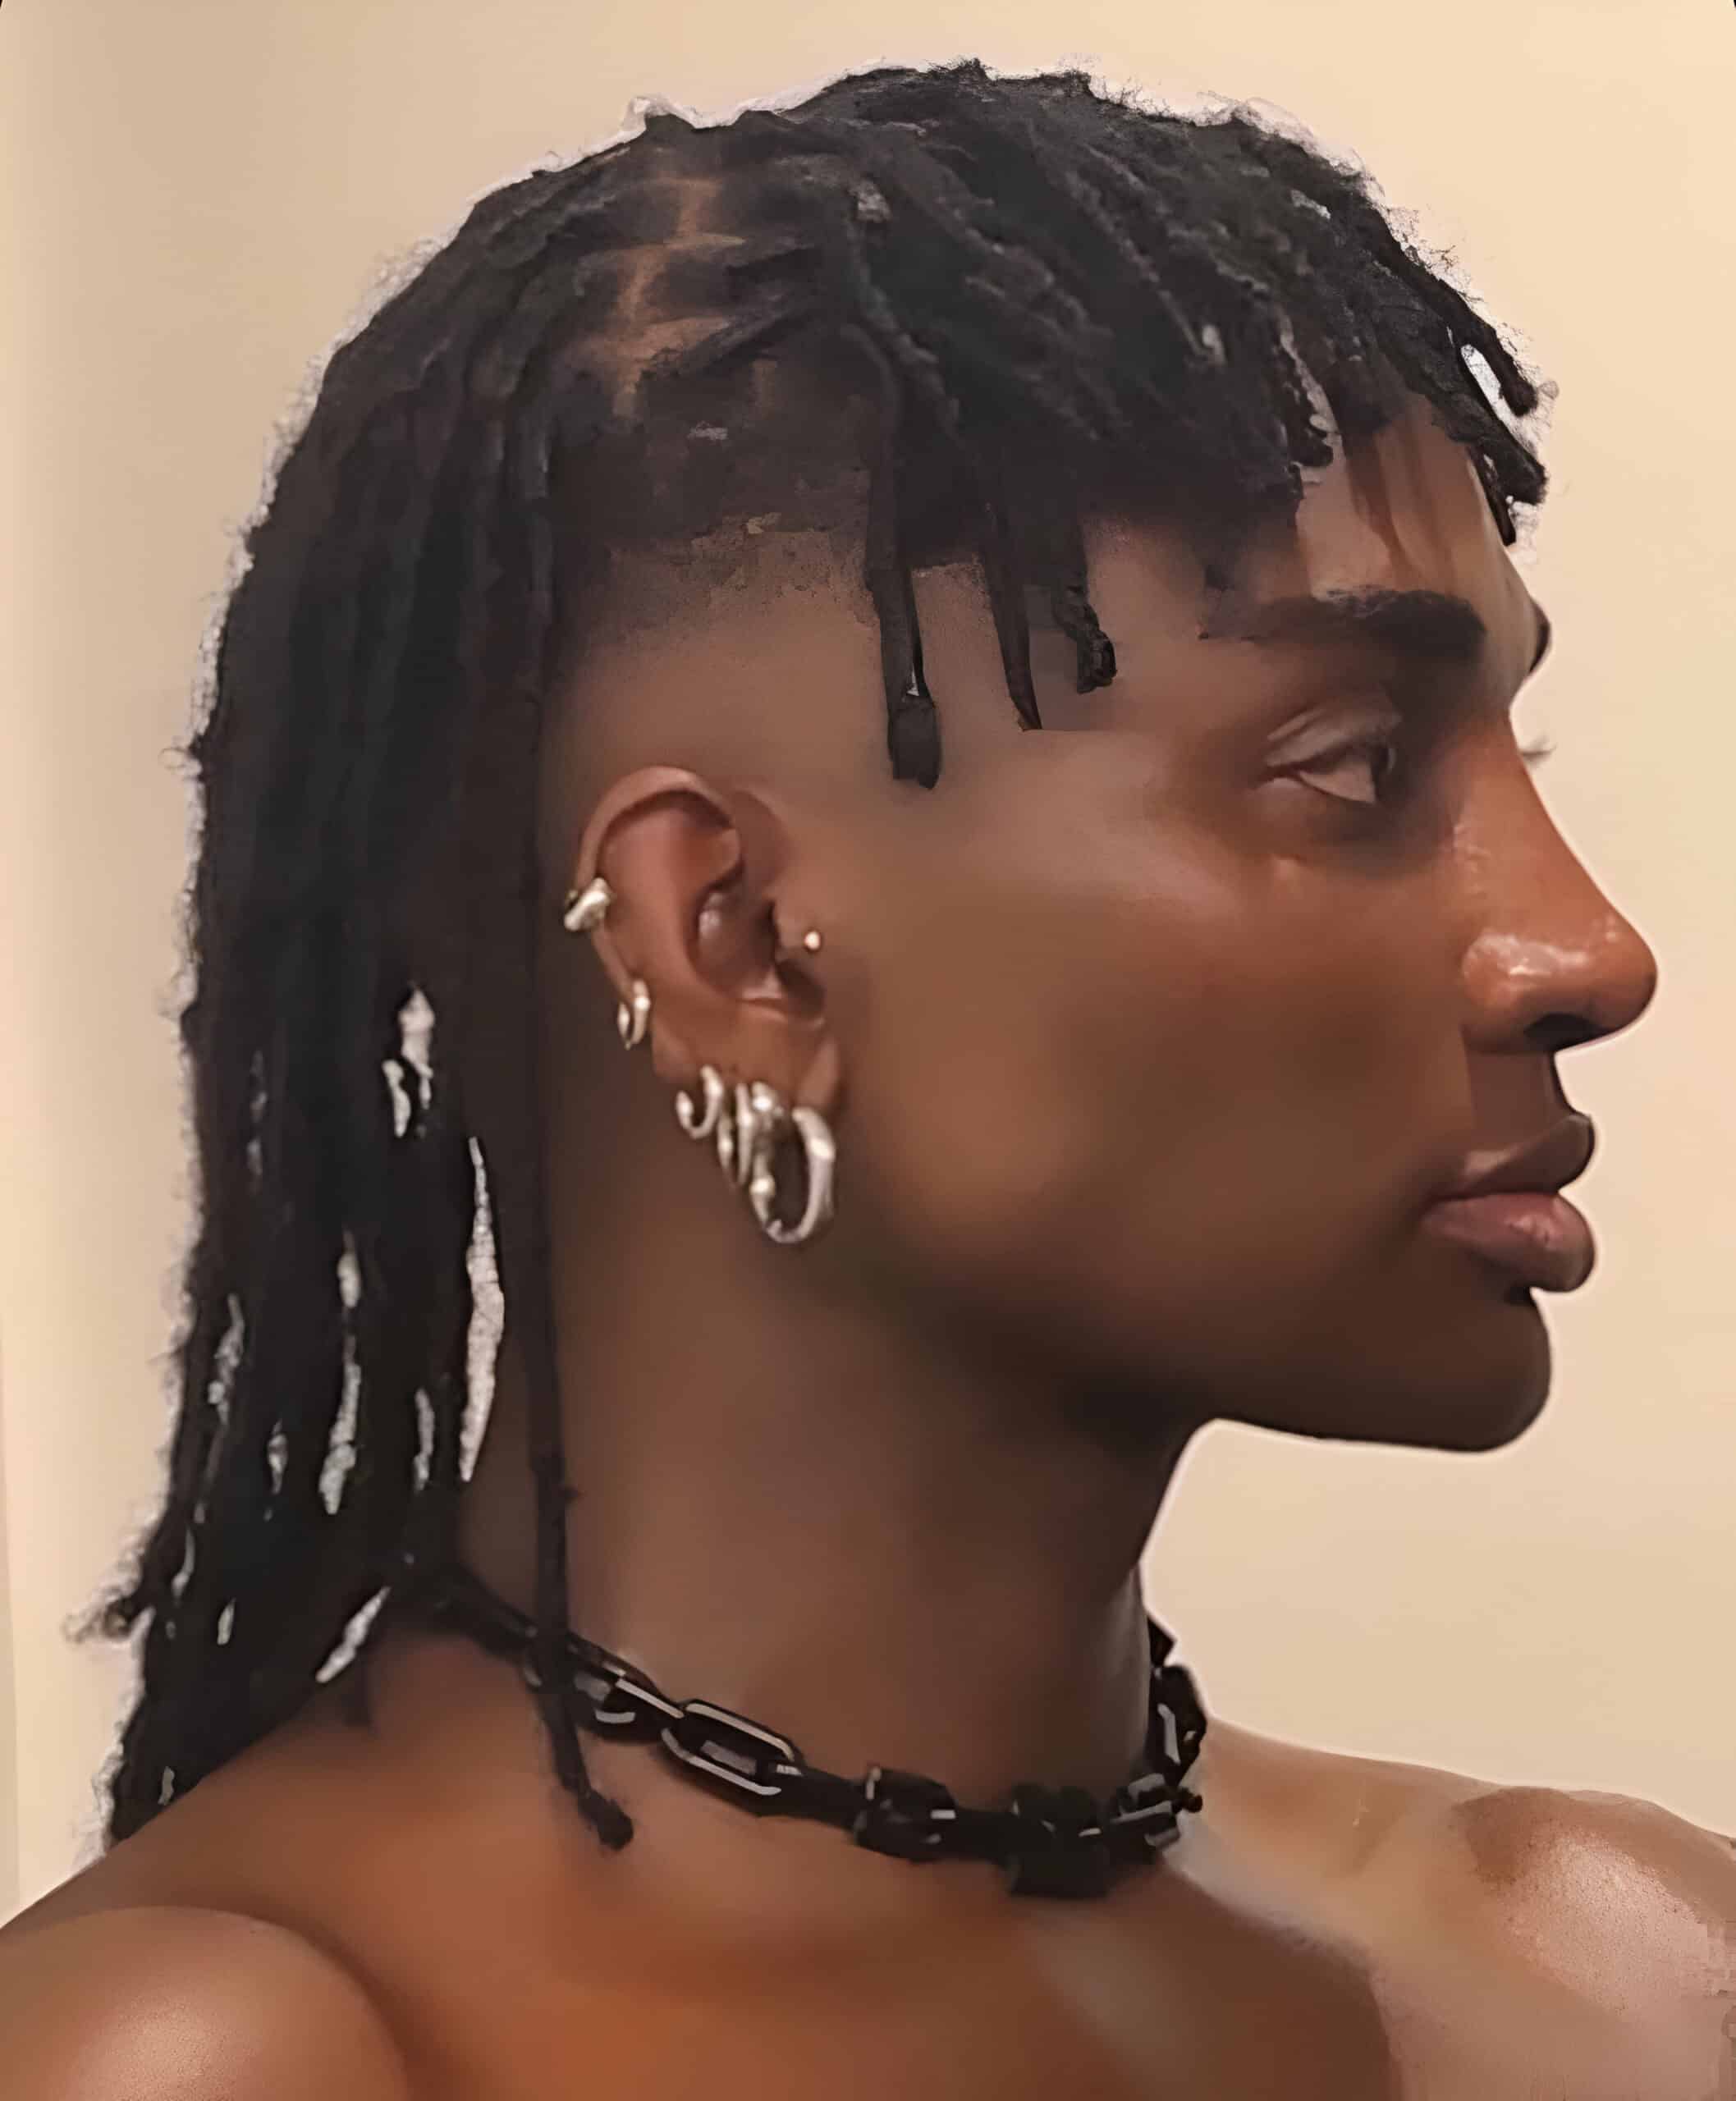 Image of Dreadlock Mullet inspired by Dreadlock Hairstyles for Men